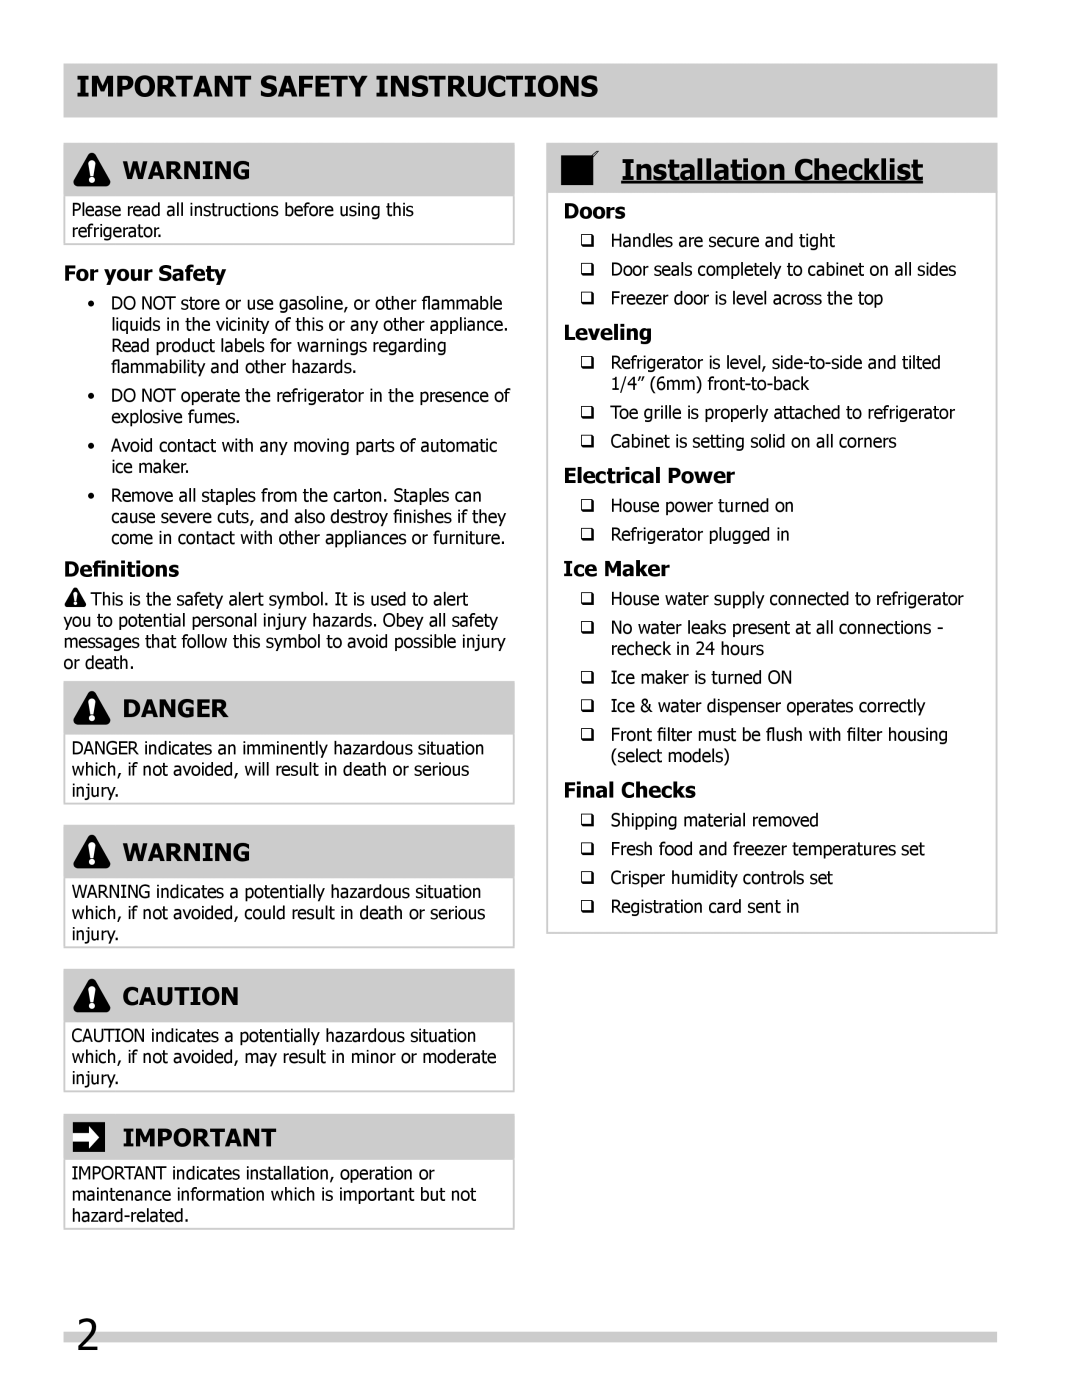 Frigidaire FGUI2149LF Important Safety Instructions, Installation Checklist, Danger, For your Safety, Definitions, Doors 